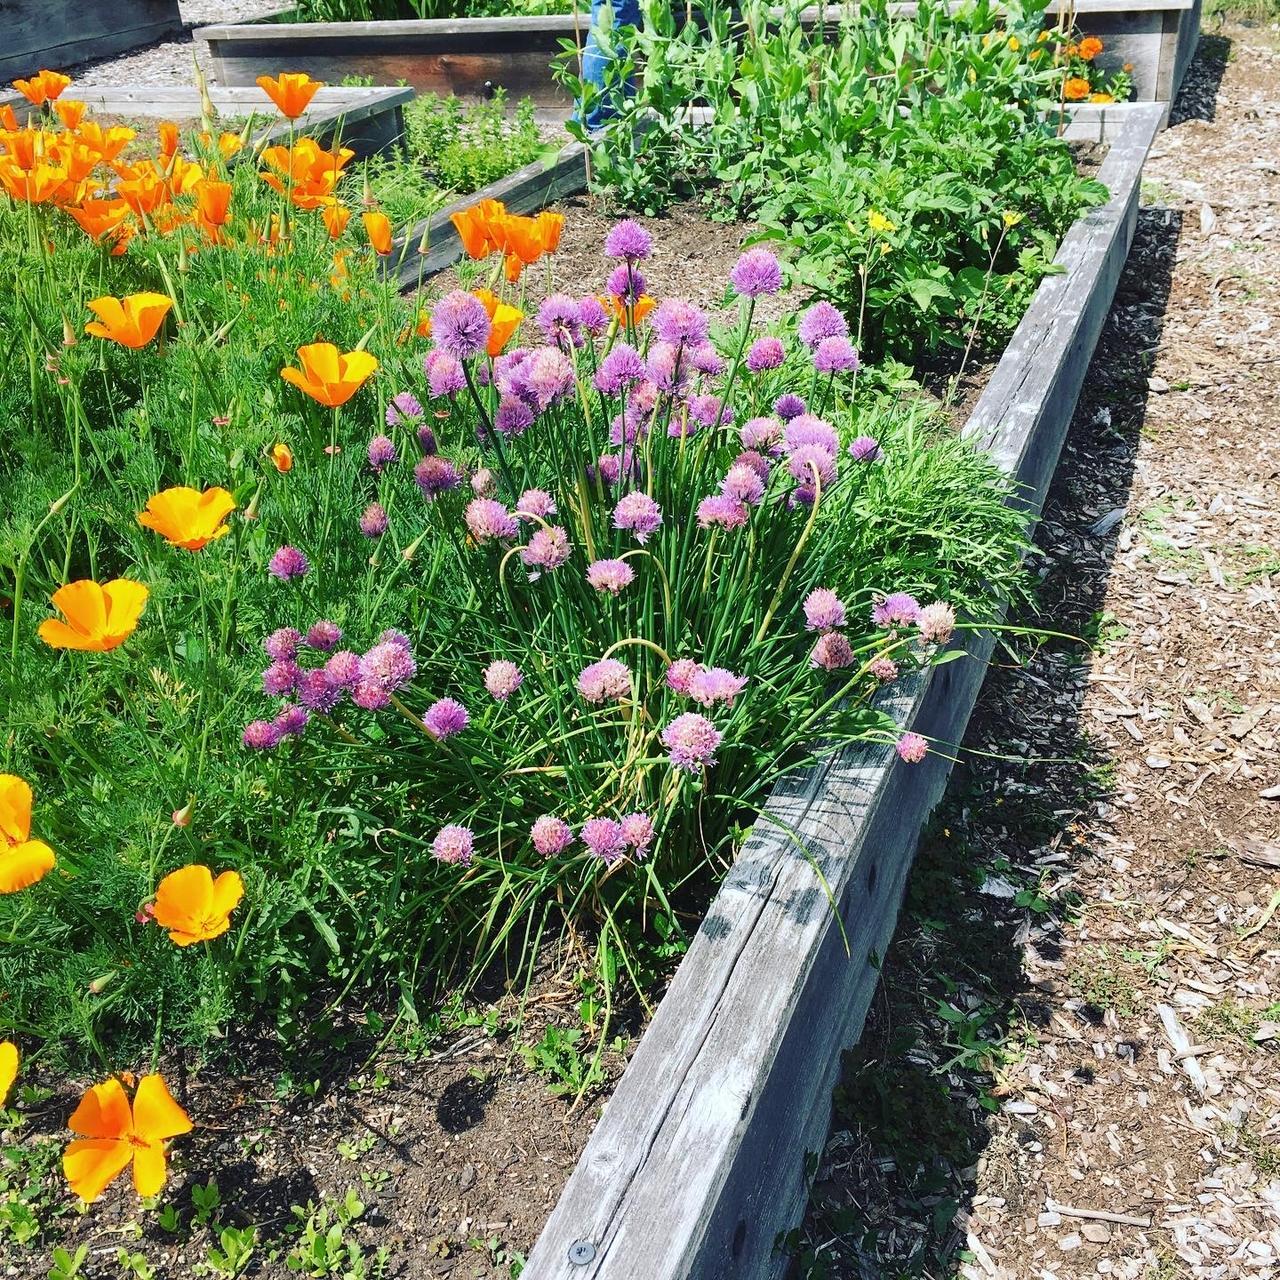 Orange poppies and purple chives contrast sharply in a raised gardening bed.